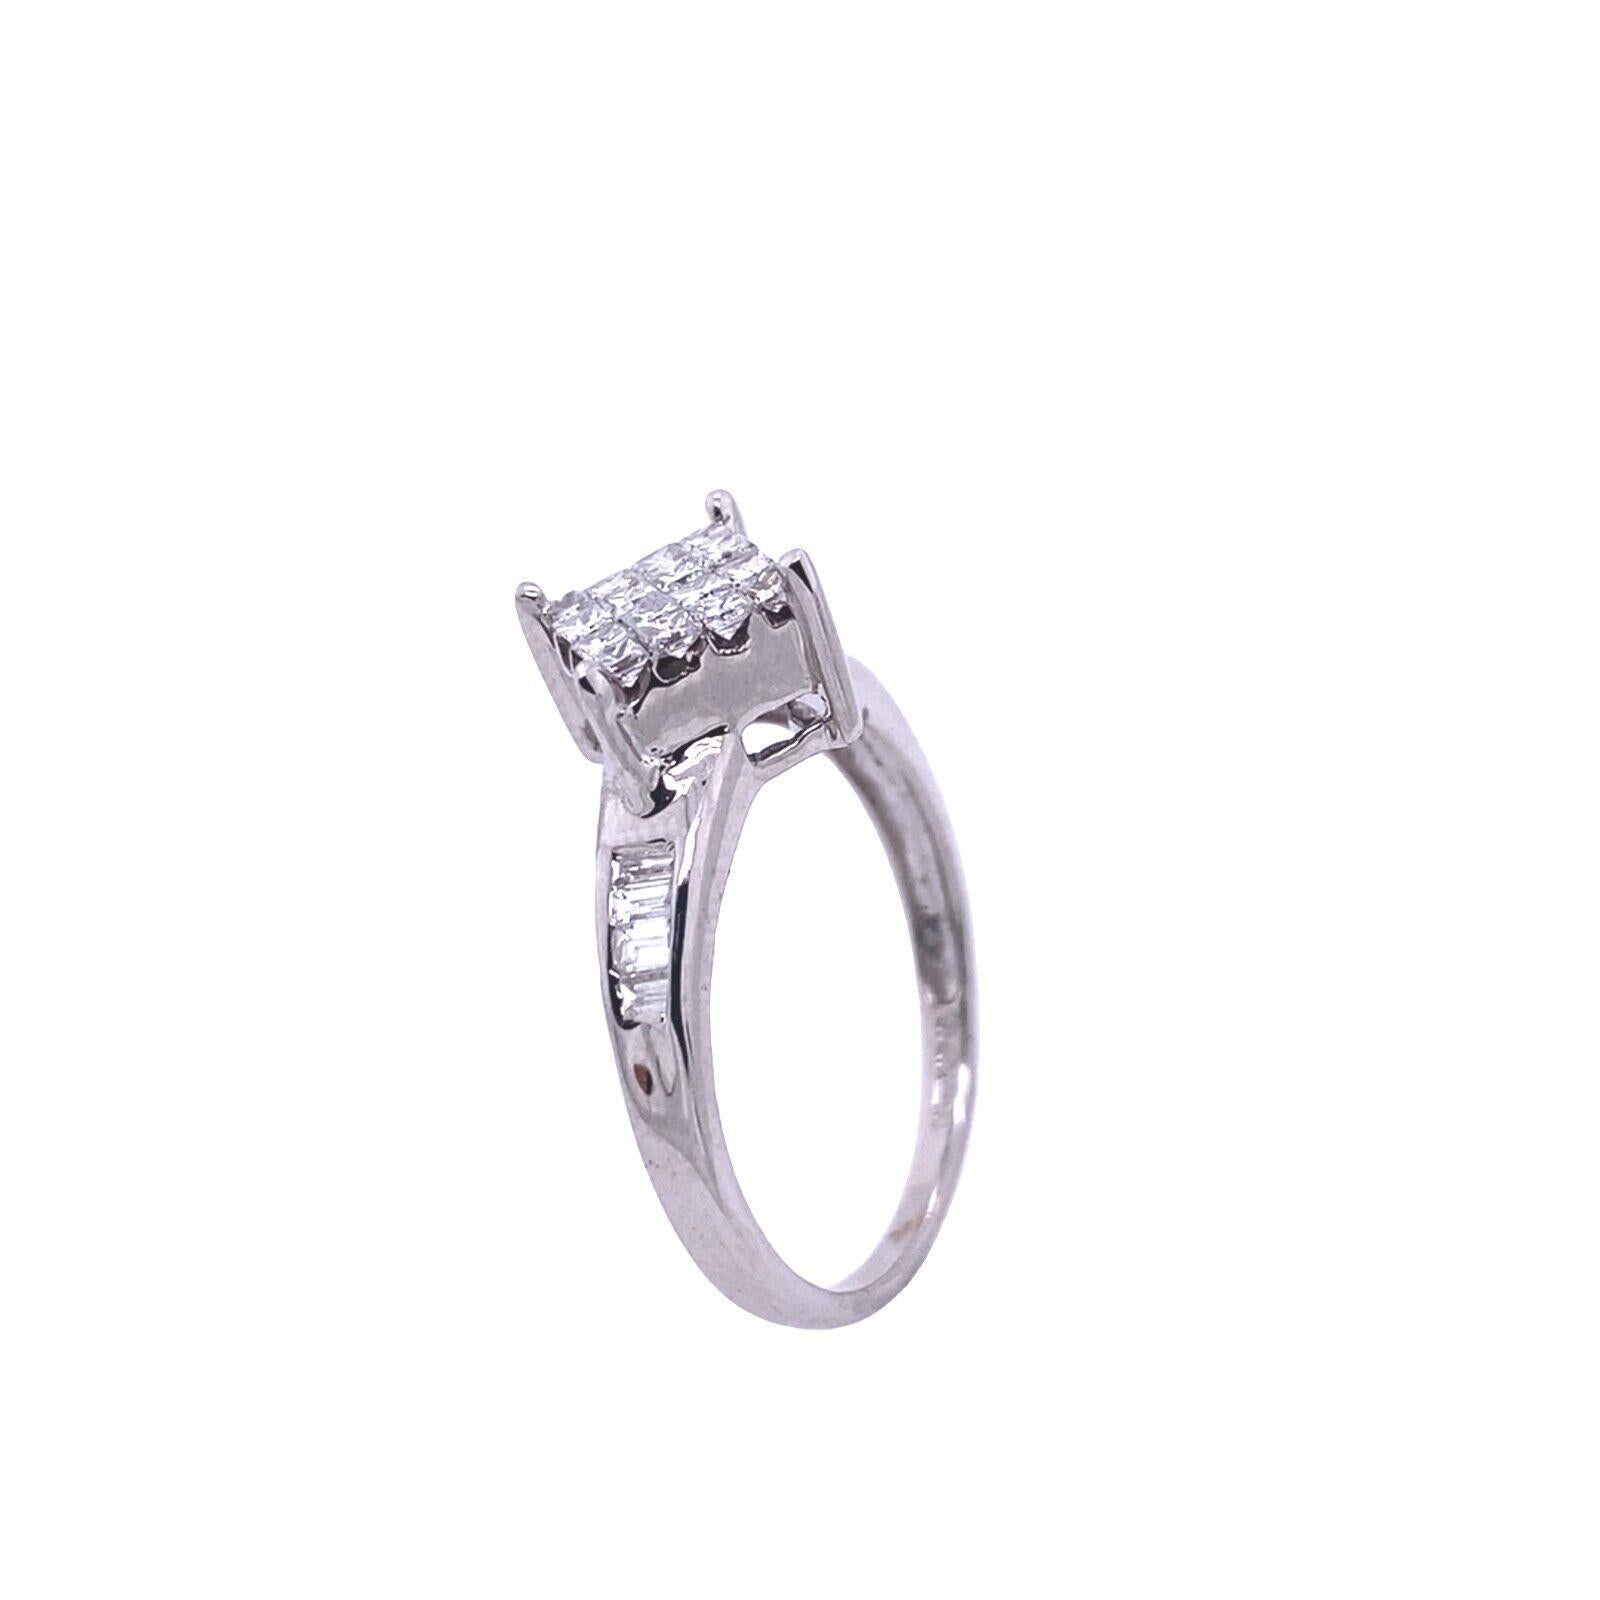 18ct White Gold Princess & Baguette Cut Diamond Ring,Total Diamond Weight 0.52ct

This beautiful princess cut Diamond ring features a total Diamond weight of 0.52ct and is set in 18ct White Gold. The ring is embellished with baguette Diamonds which